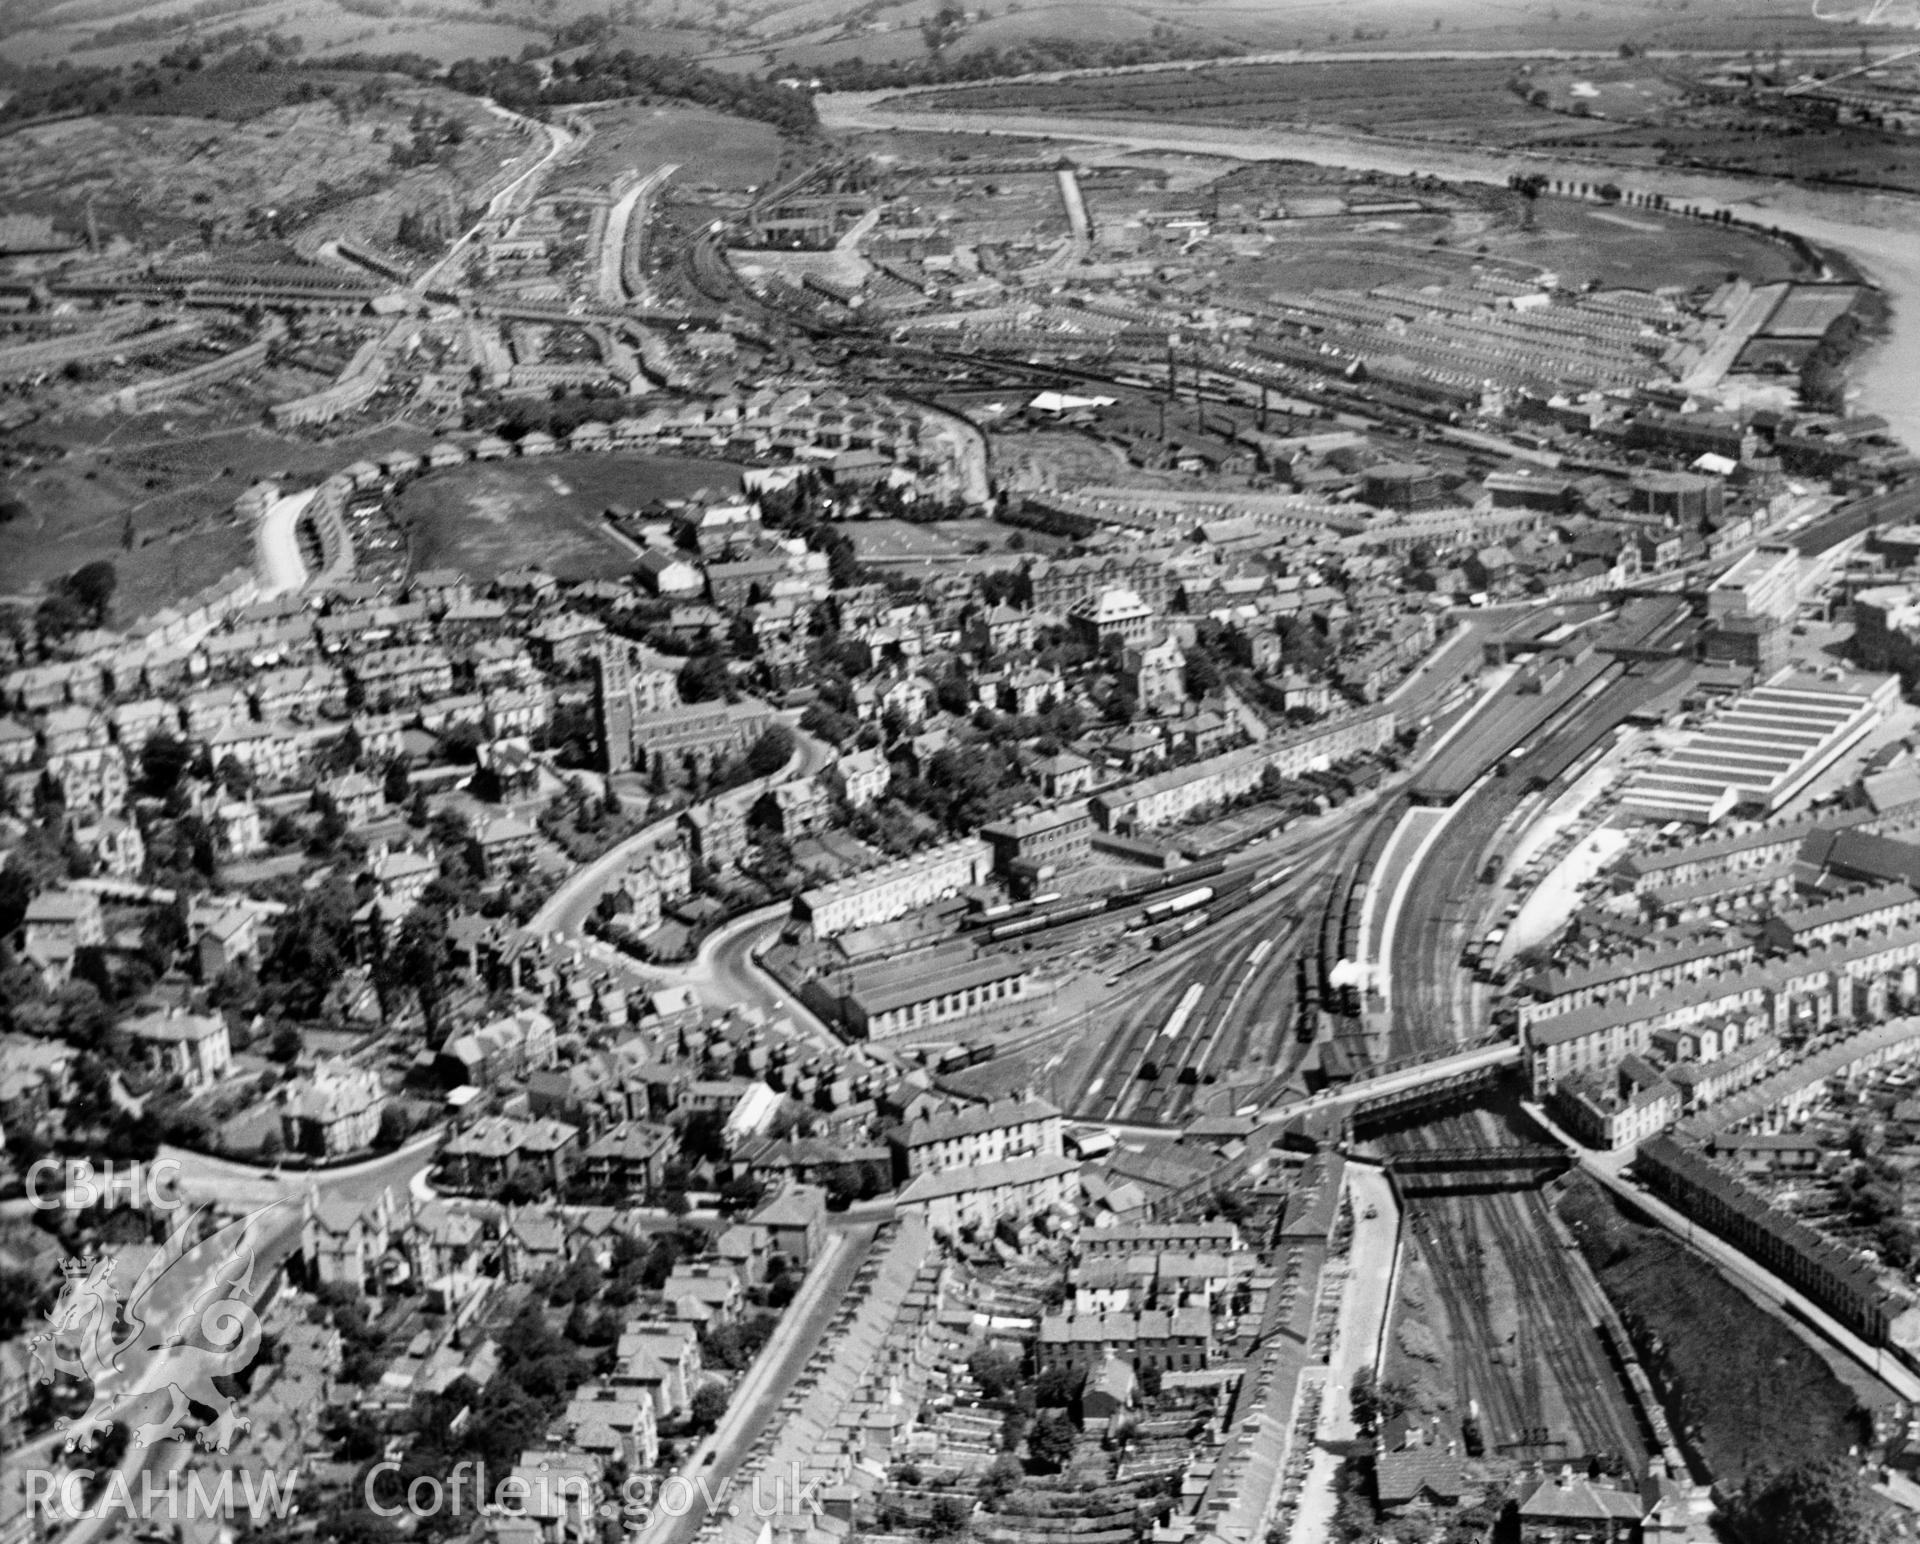 General view of Newport, oblique aerial view. 5?x4? black and white glass plate negative.